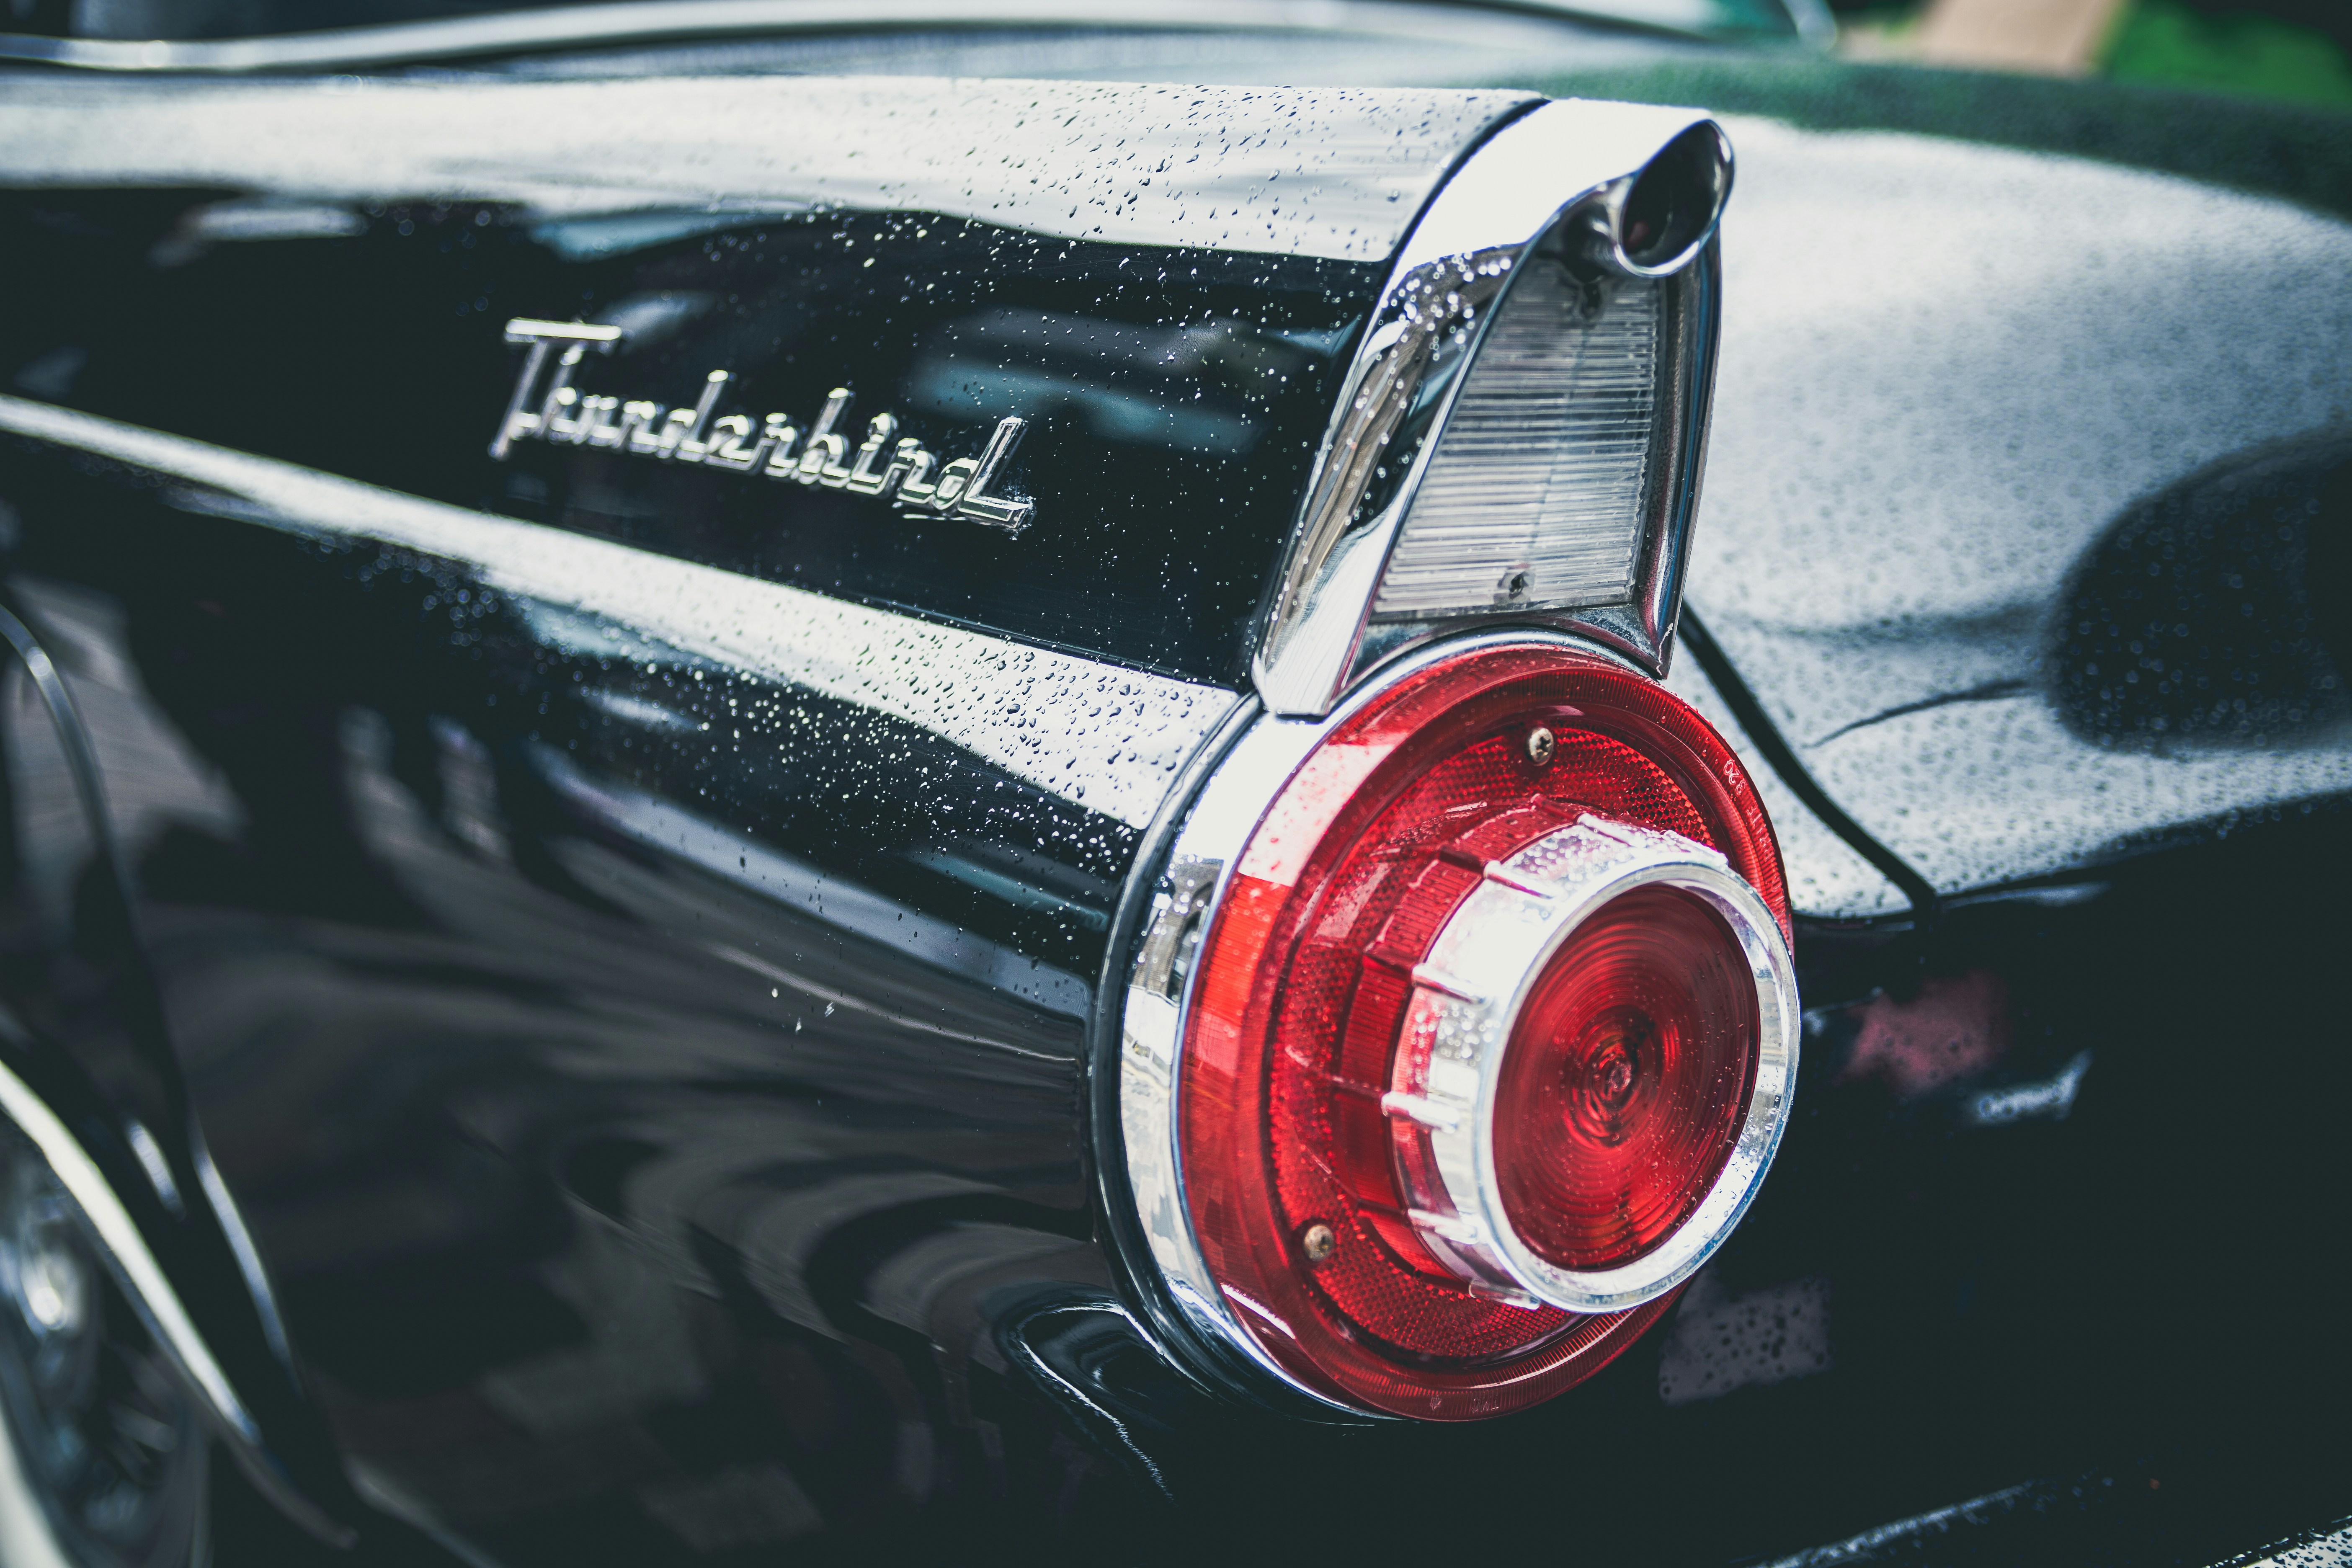 Choose from a curated selection of car photos. Always free on Unsplash.